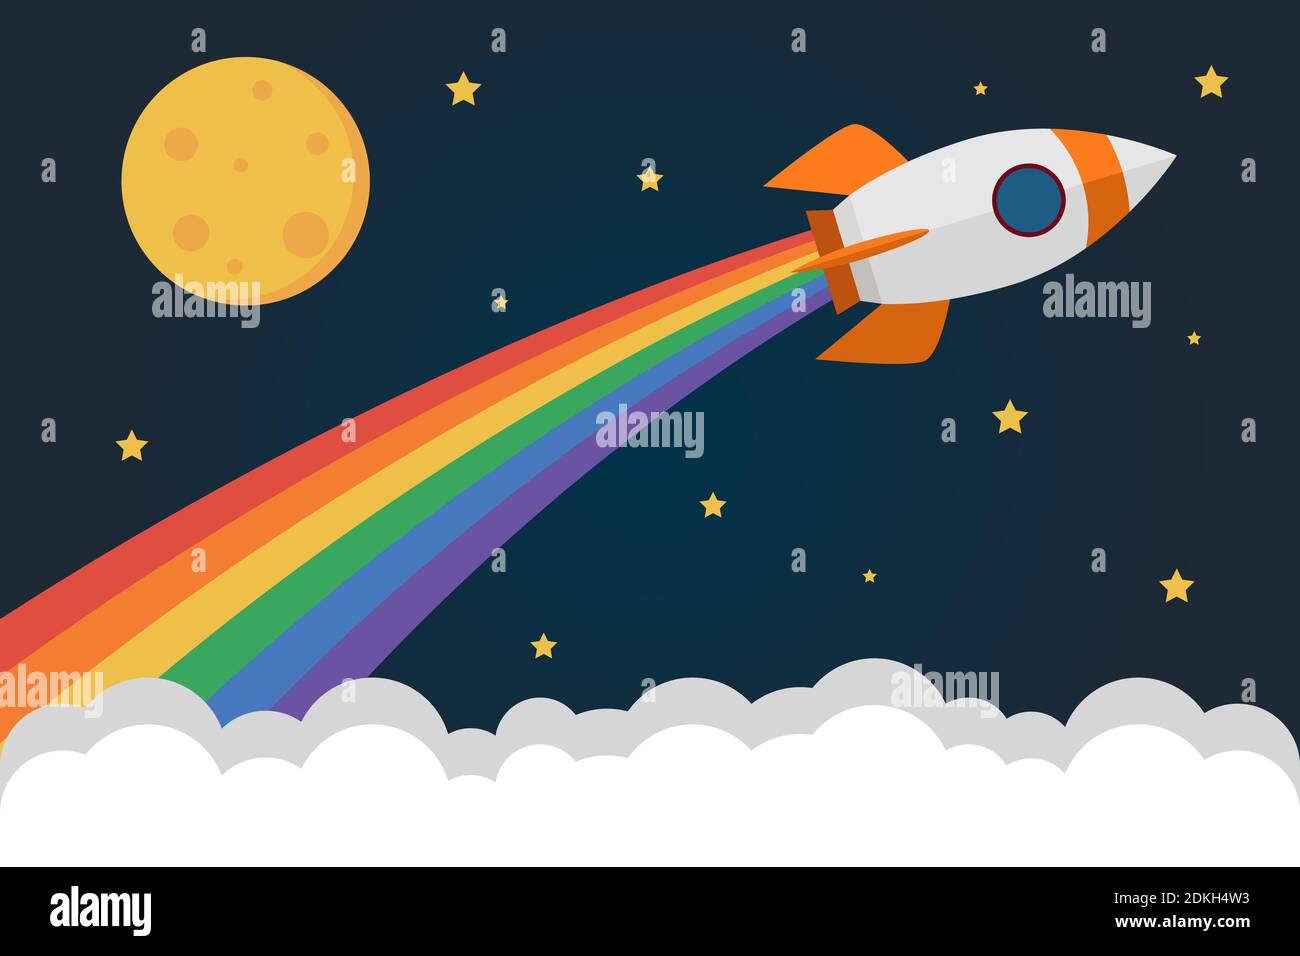 Rocket flies into space and emits smoke in the colors of the rainbow. Copy space for design or text. Flat vector illustration Stock Vector